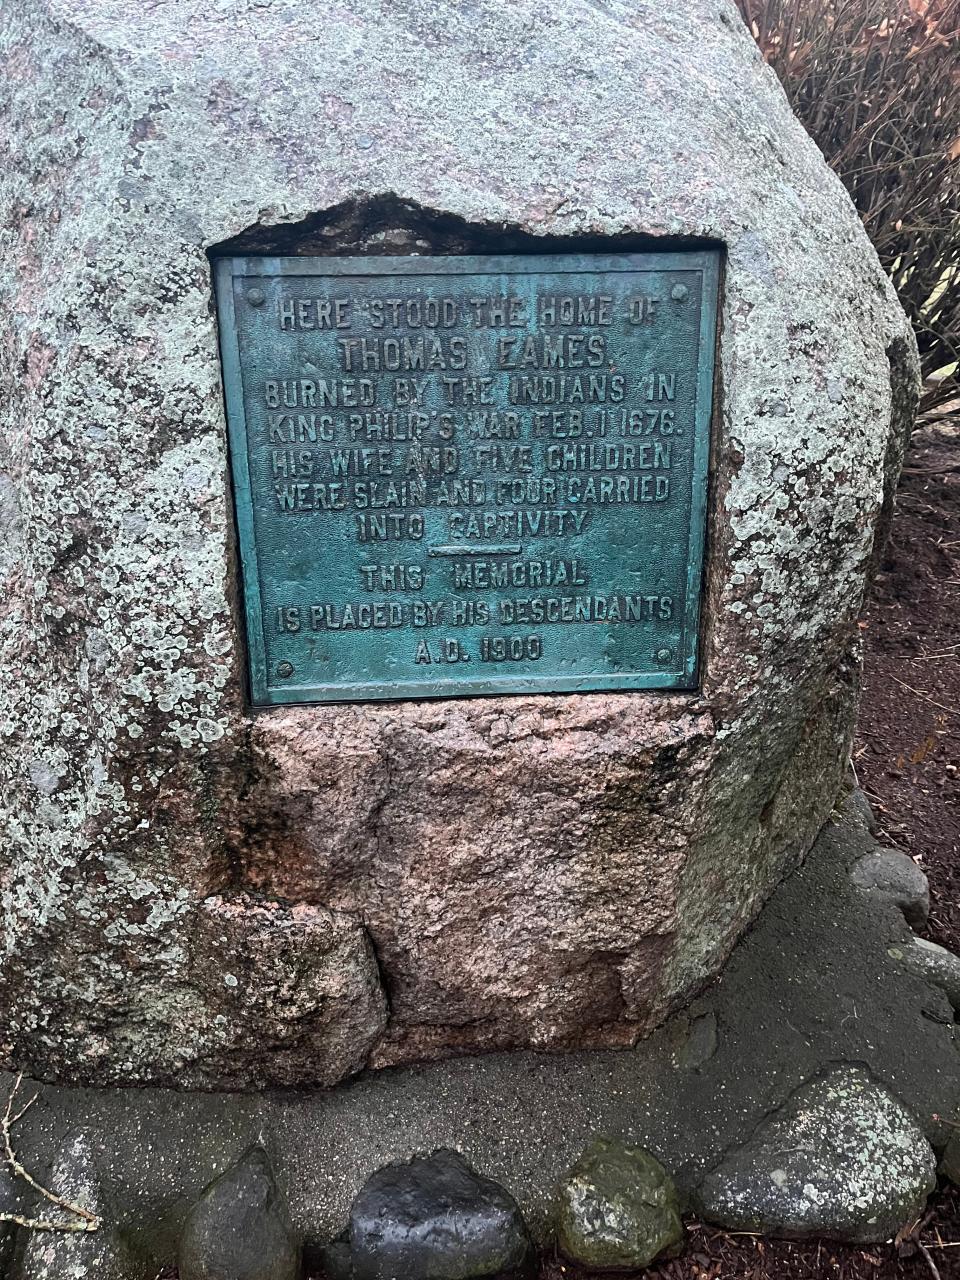 A sign at Mount Wayte partially describes the incident on Feb. 1 1676, involving 11 Nipmuc men and members of the Eames Family.